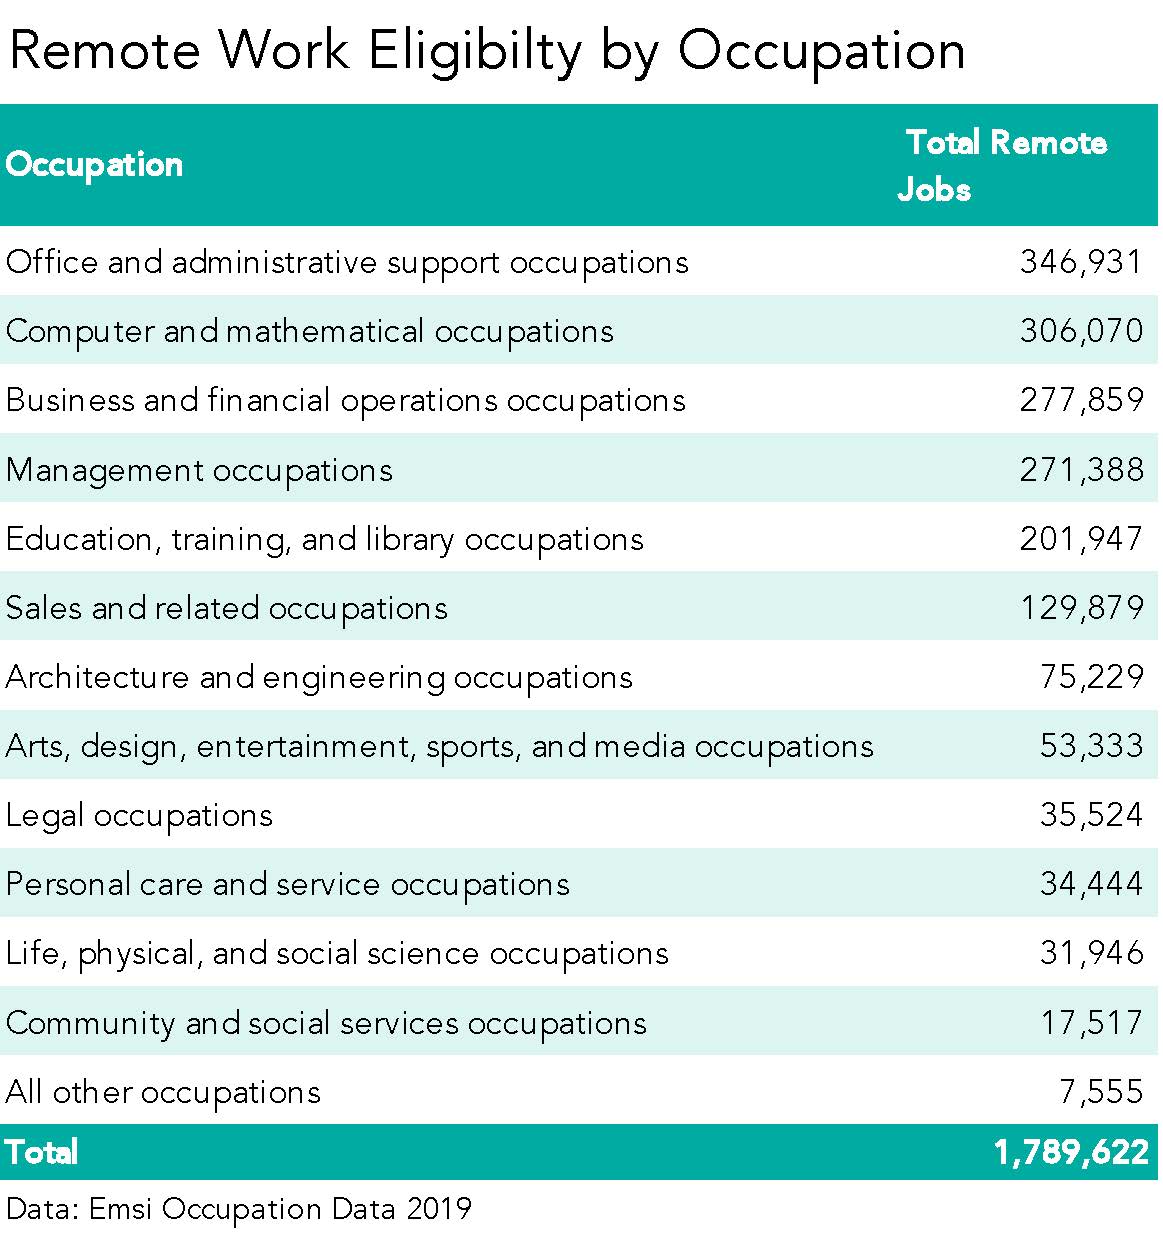 http://www.bayareaeconomy.org/wp-content/uploads/2020/12/Remote-Work-Eligibility-by-Occupation.jpg